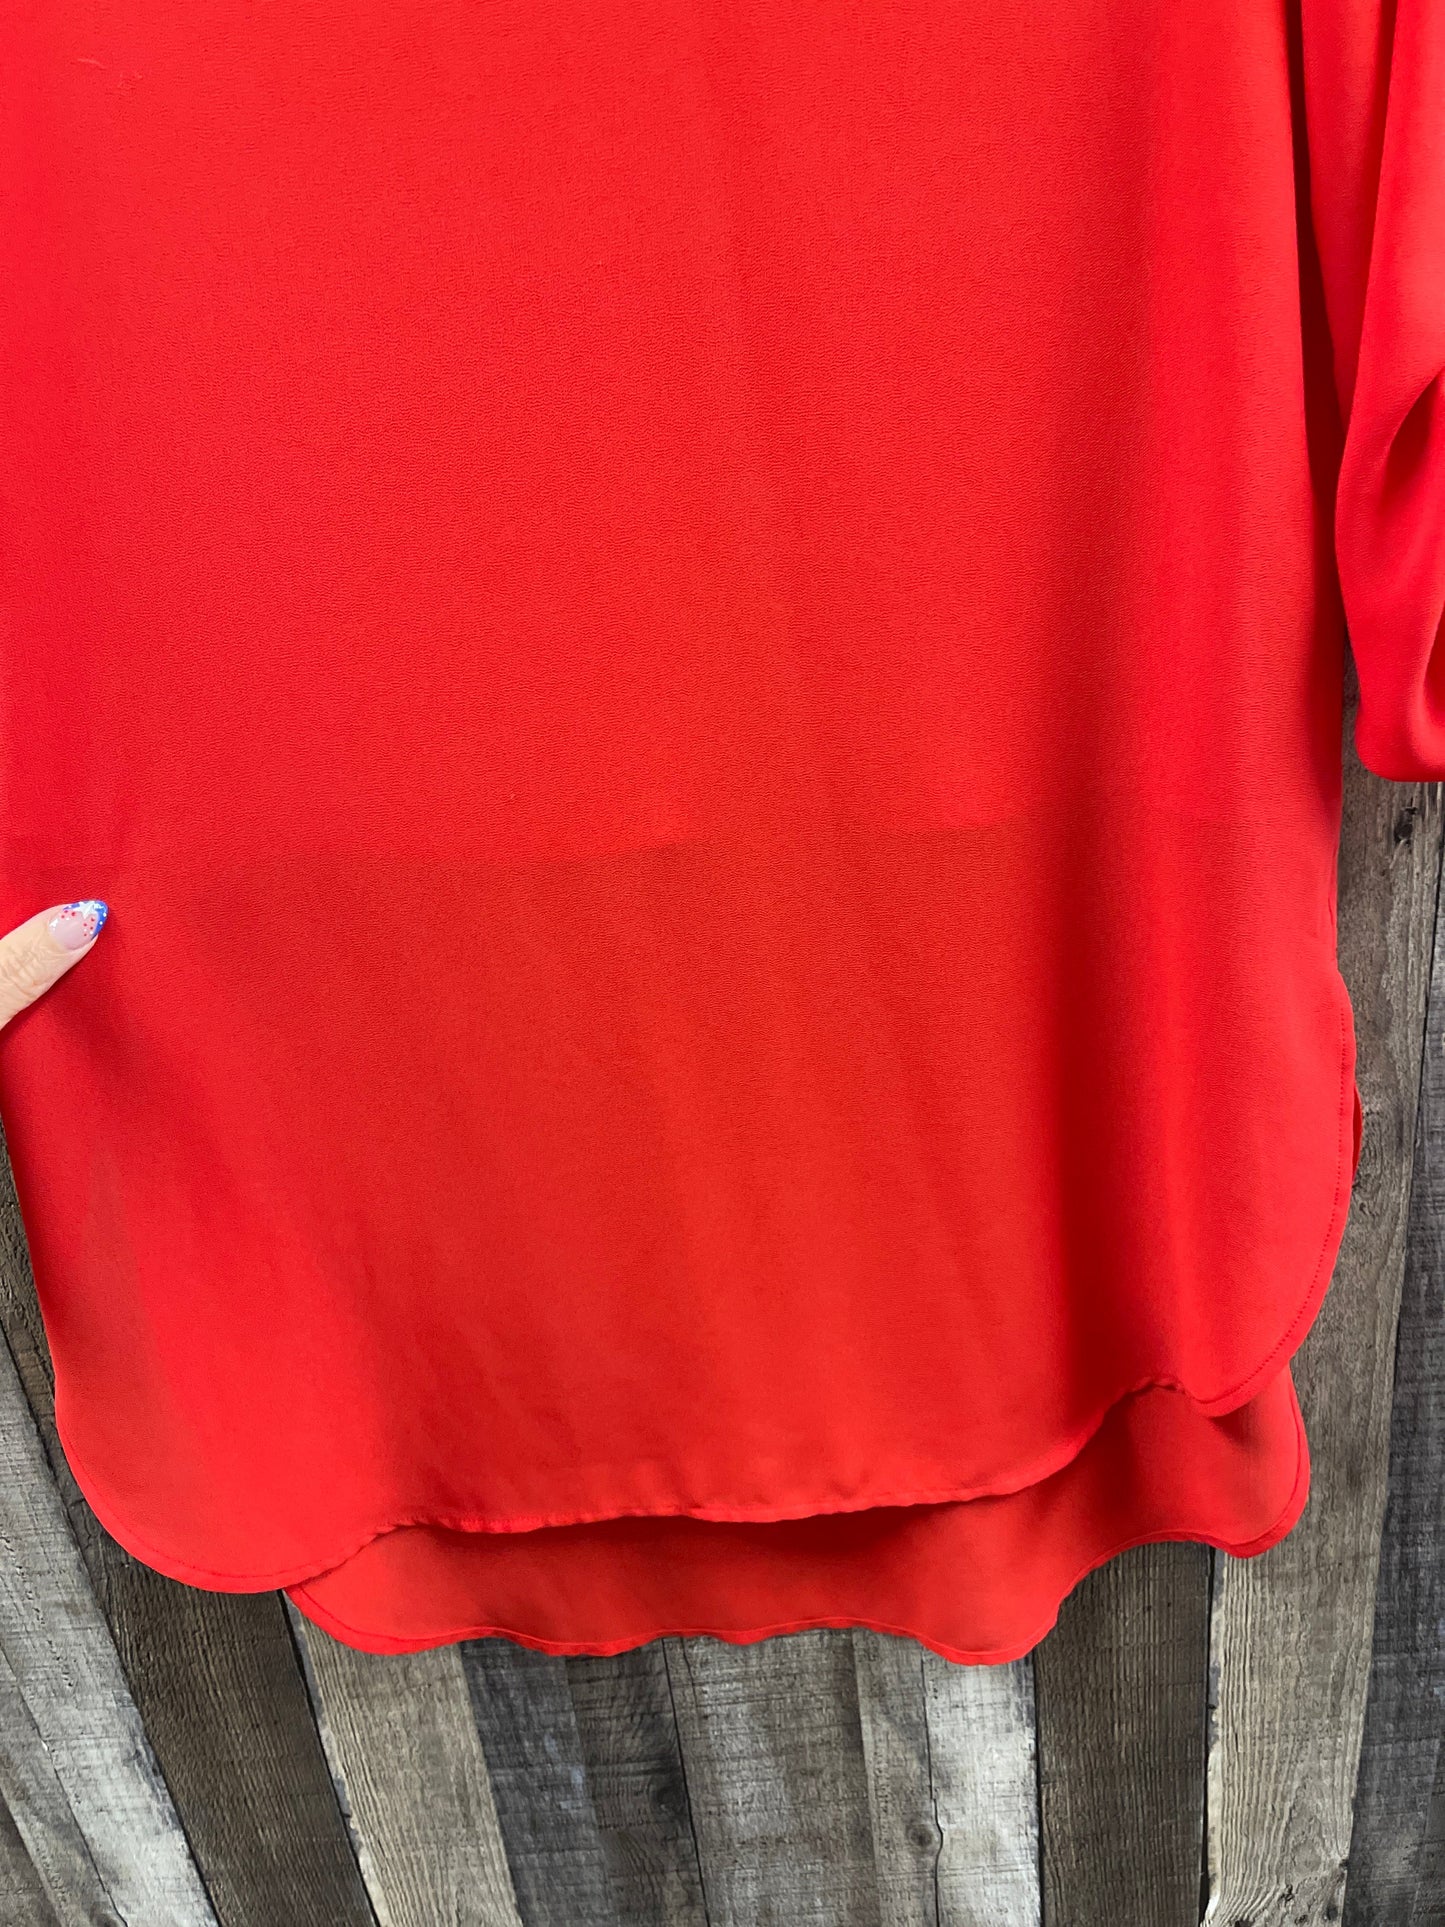 Red Tunic Long Sleeve Chicos, Size Xs Petite